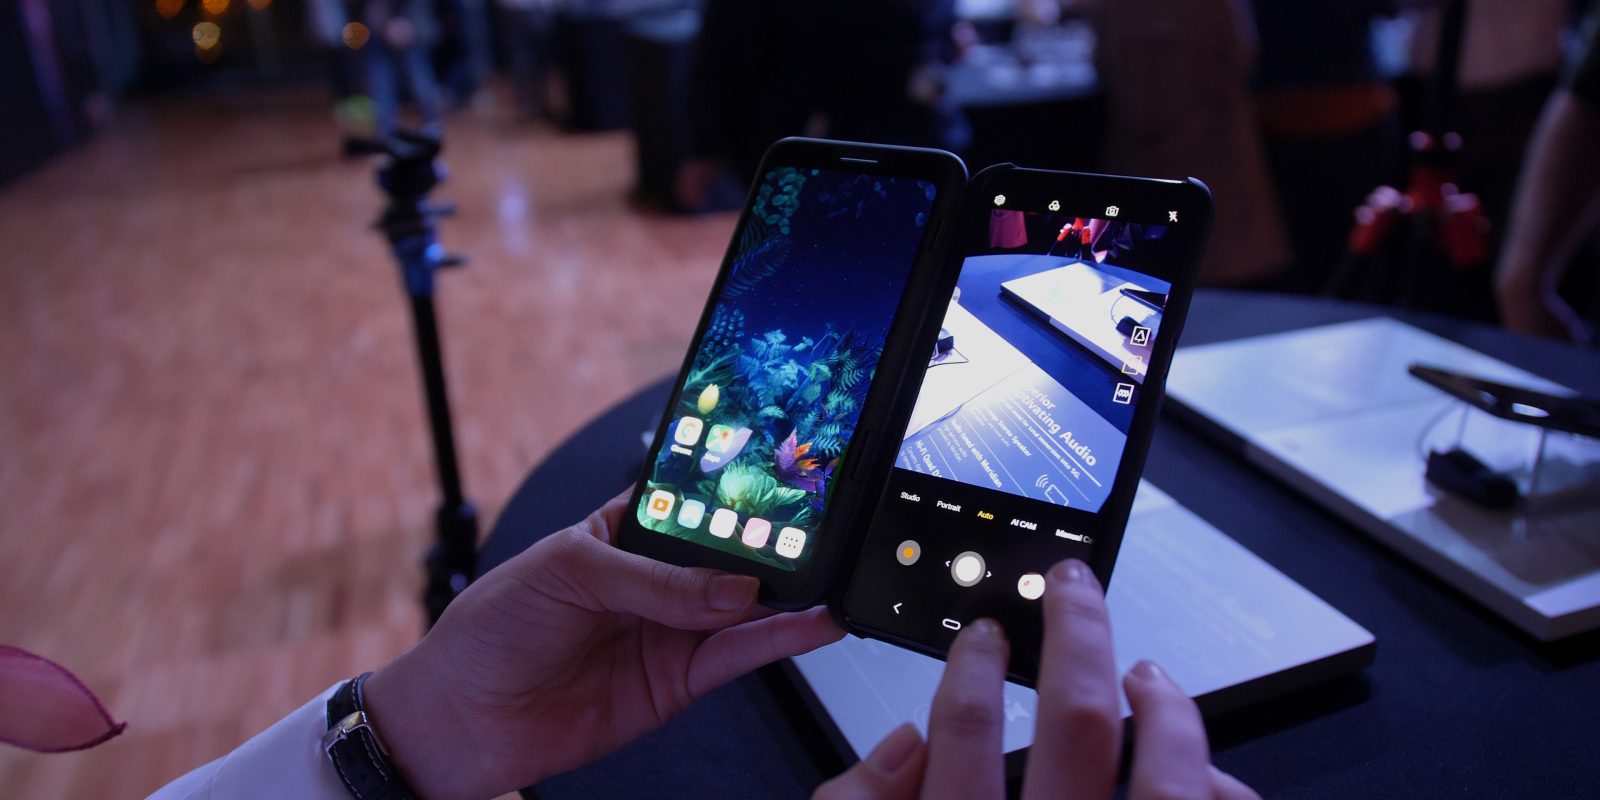 LG V50 ThinQ hands-on